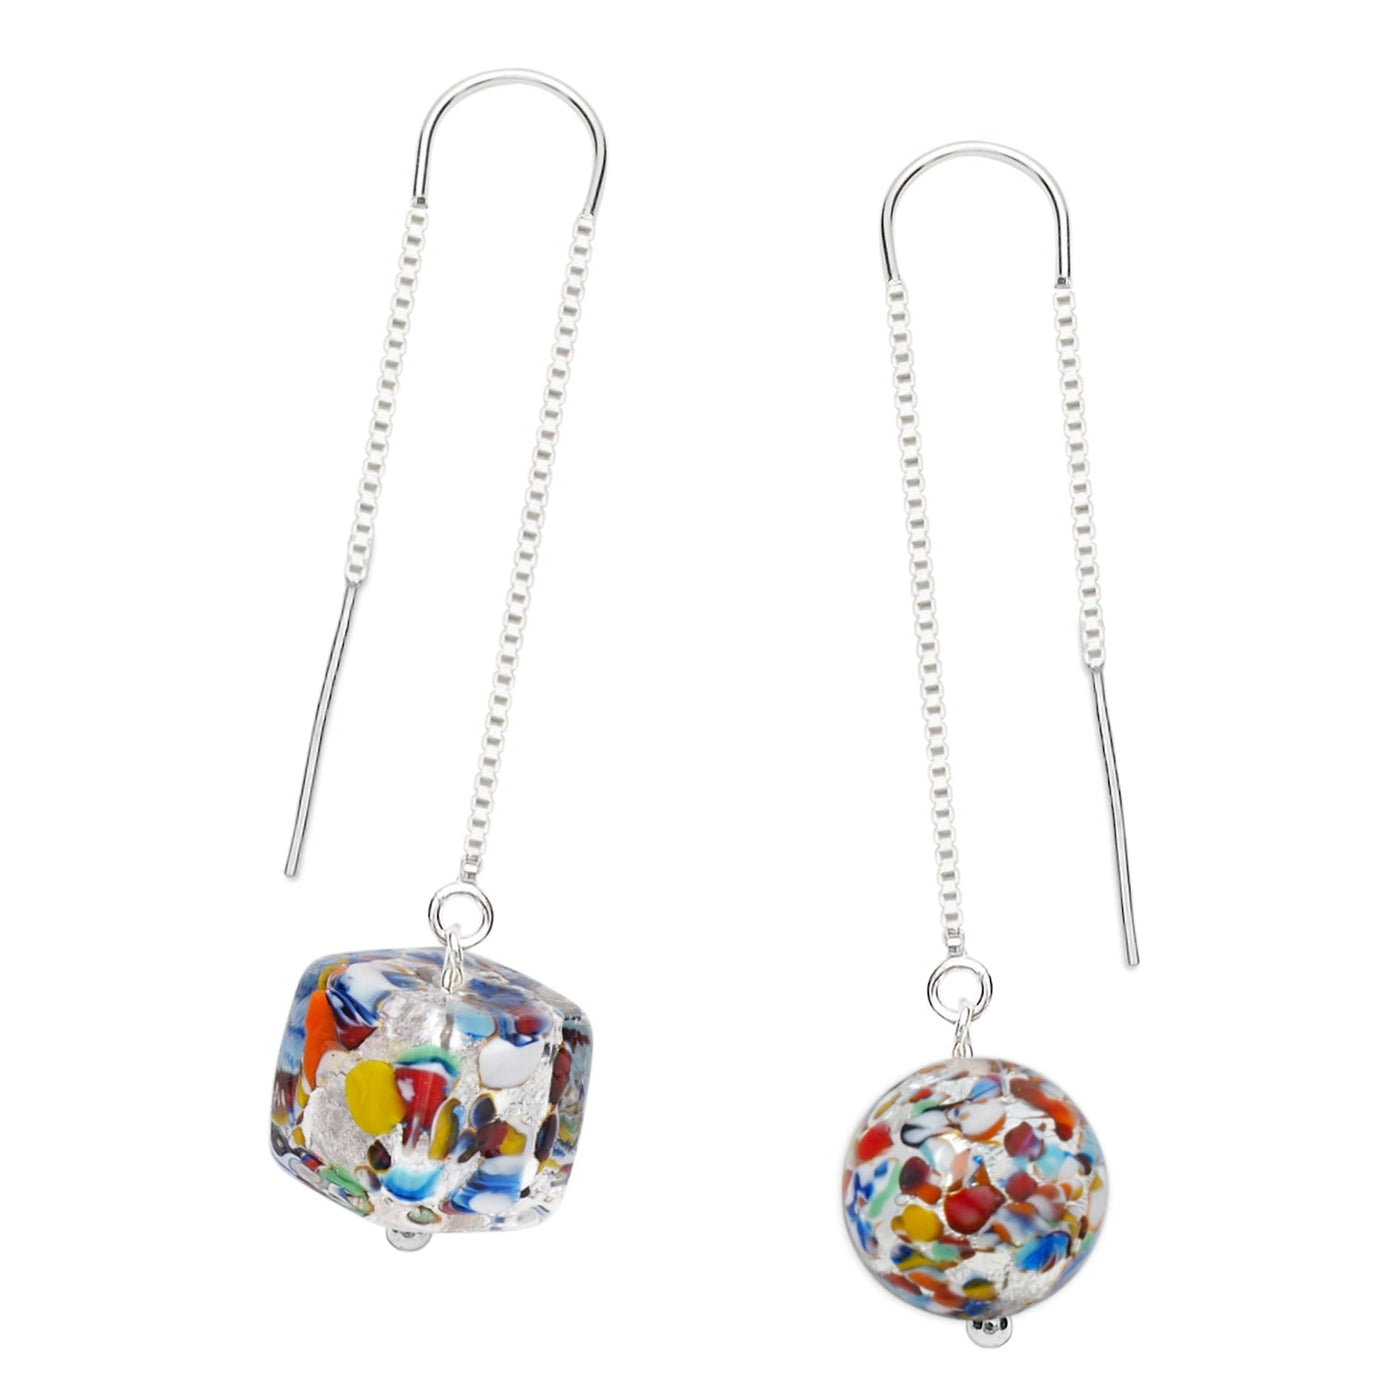 THE KISS | Bling Square Dangle Earrings - Gold and Silver each - Earrings